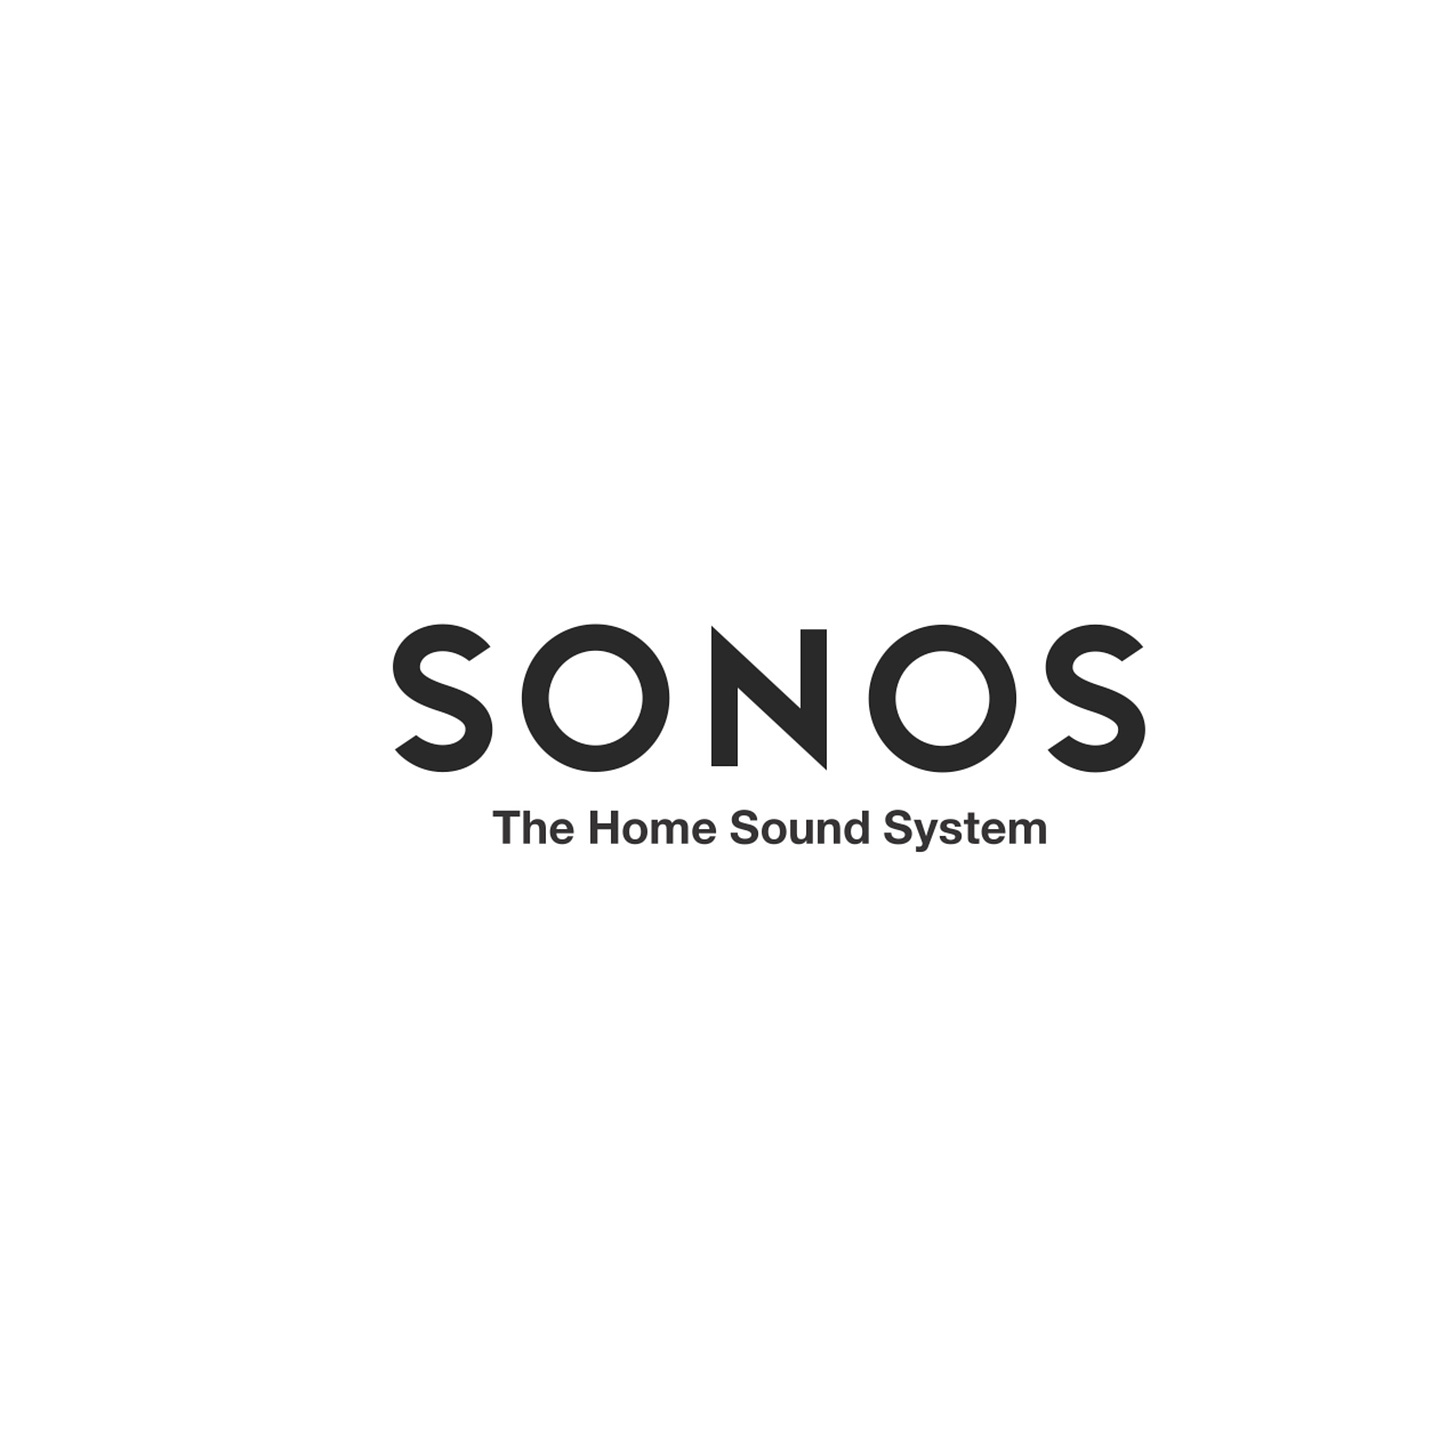 SONOS, With Partners and Industry Leaders, Ushers in New Era of Connected  Home Listening